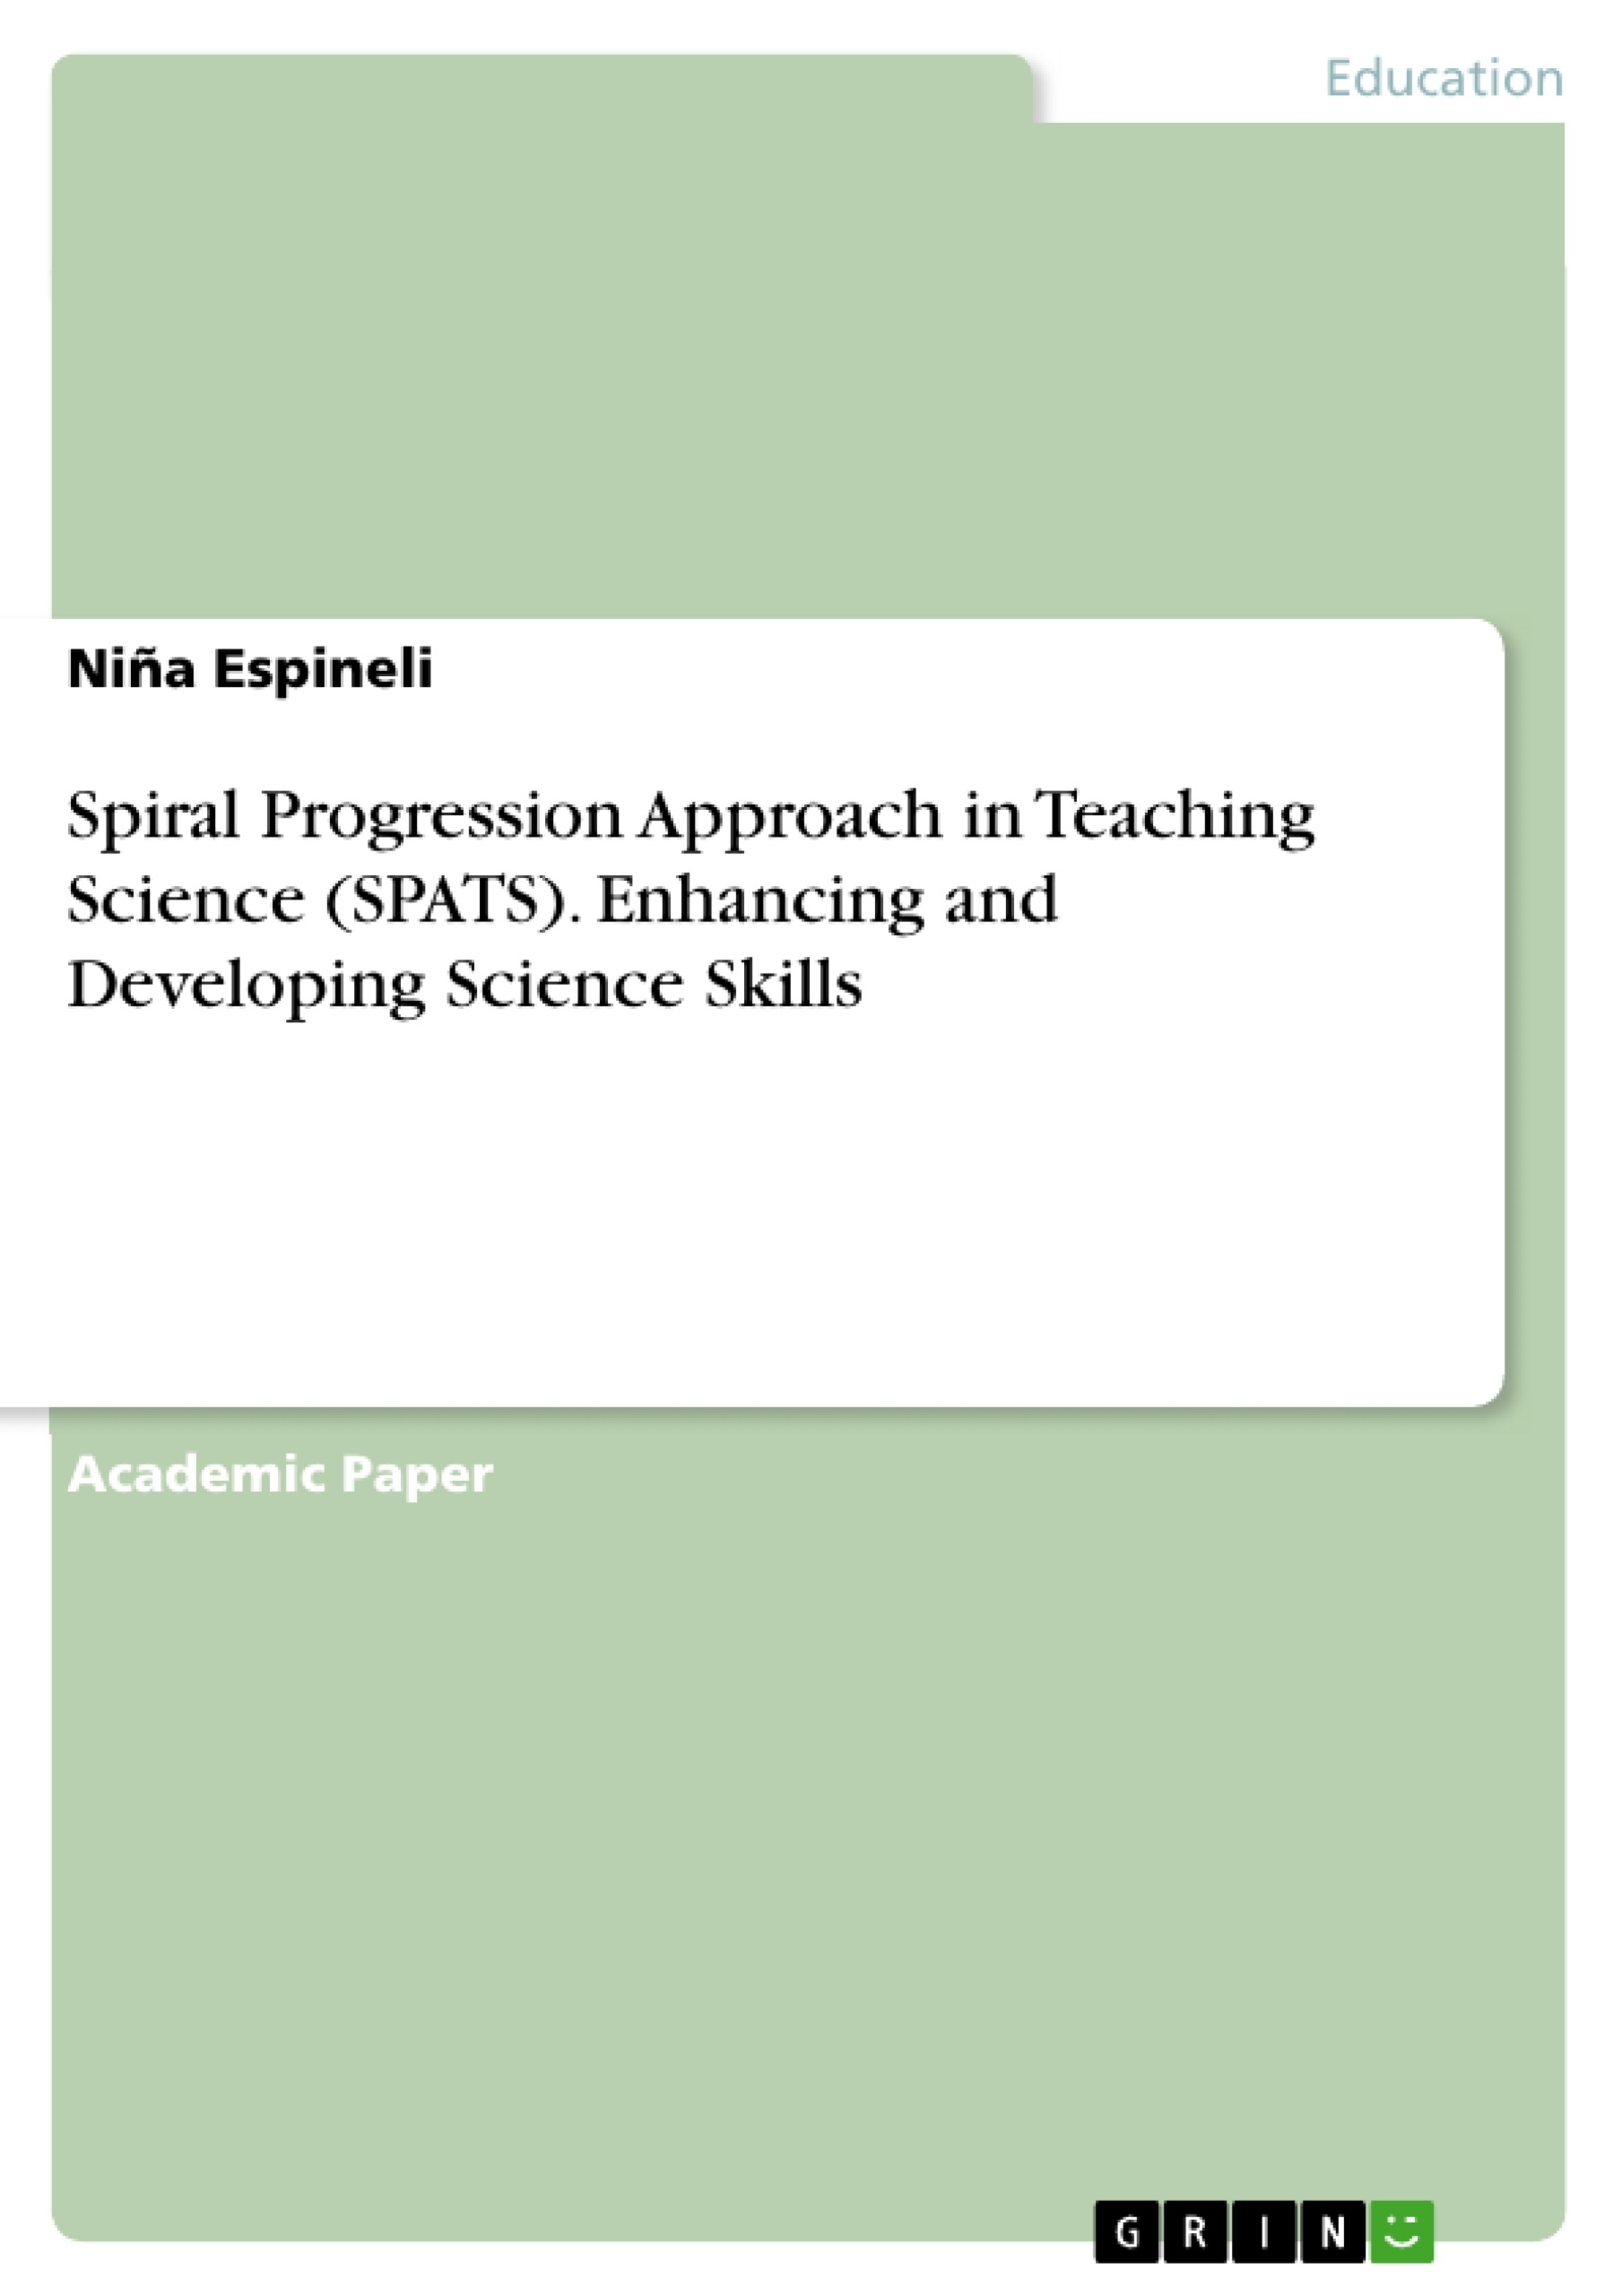 Title: Spiral Progression Approach in Teaching Science (SPATS). Enhancing and Developing Science Skills